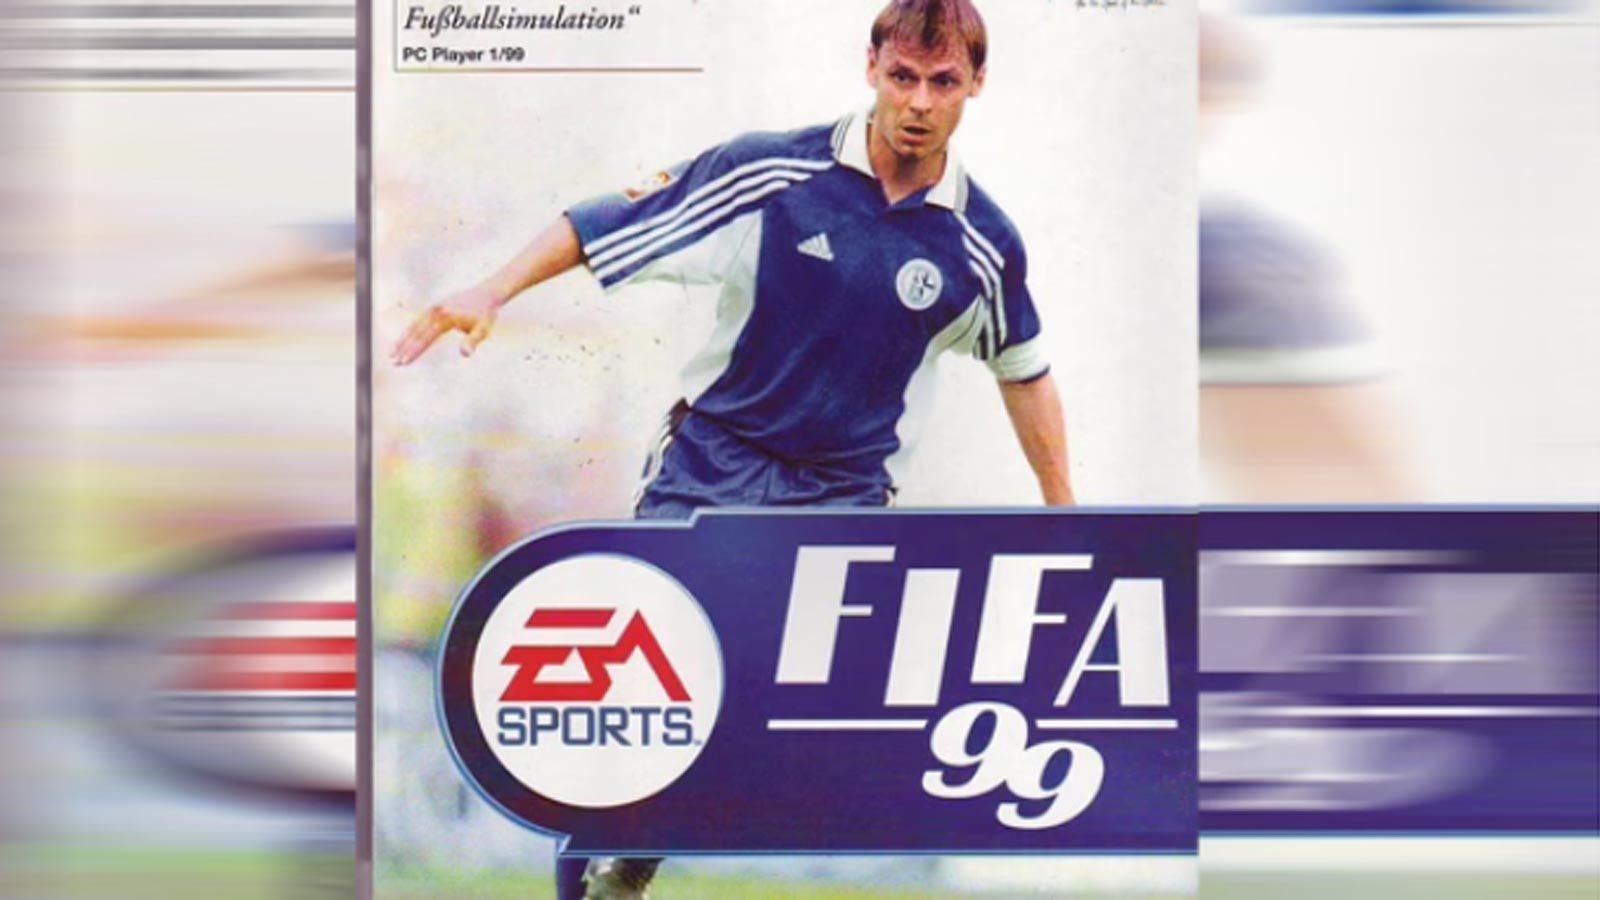 
                <strong>FIFA 99</strong><br>
                FIFA 99 - Cover-Spieler: Olaf Thon.
              